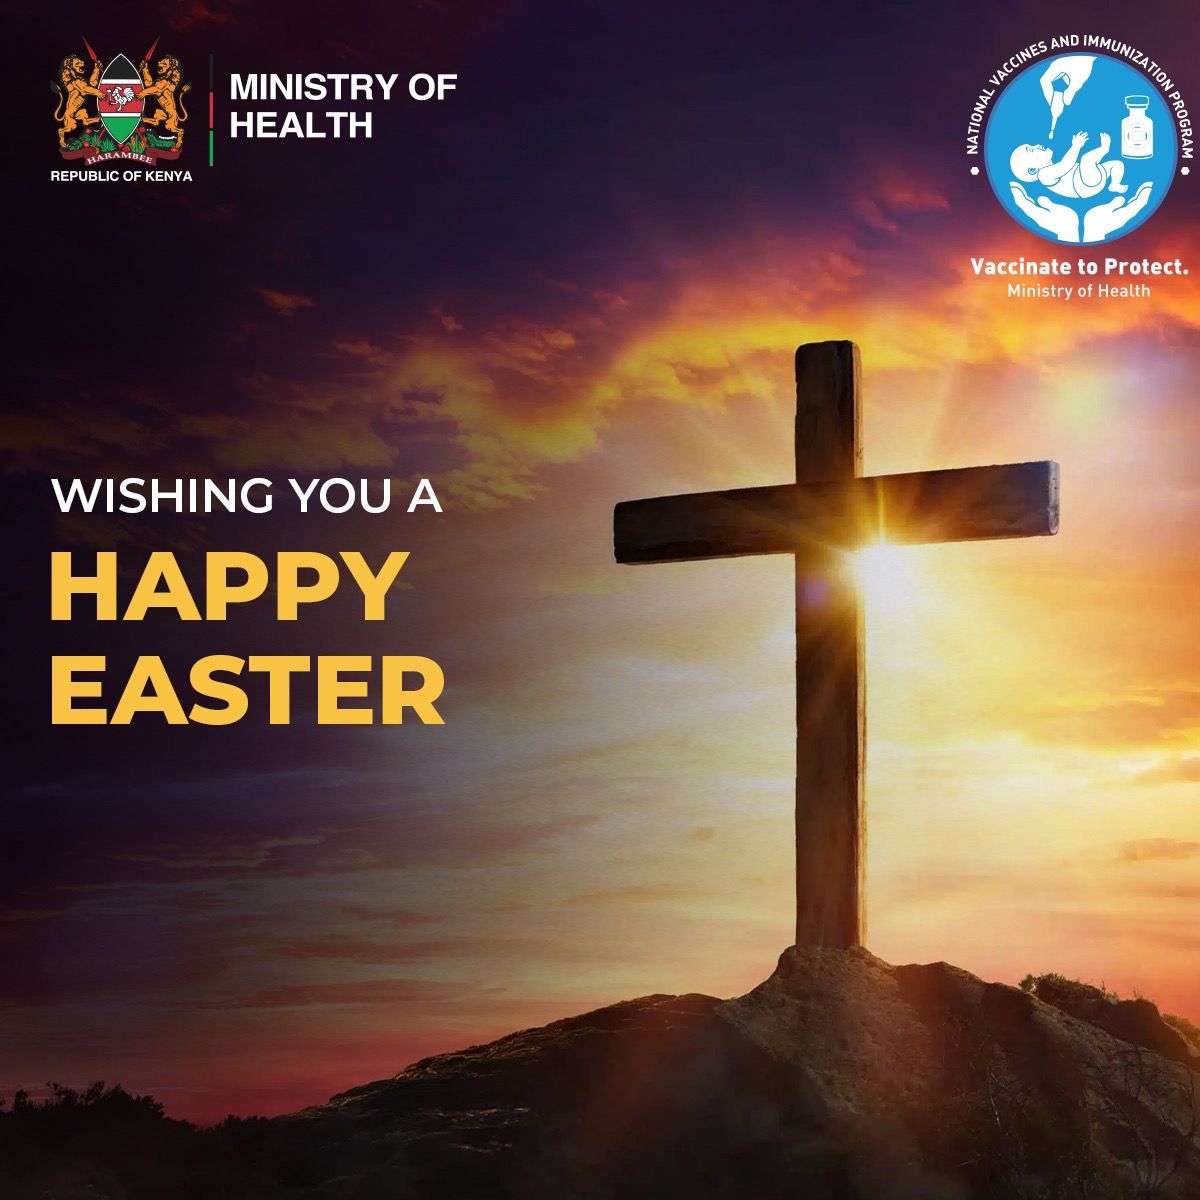 Wishing you and your loved ones a healthy and joyous day. Happy Easter from us! #VaccinateToProtect #VaccinesSaveLives